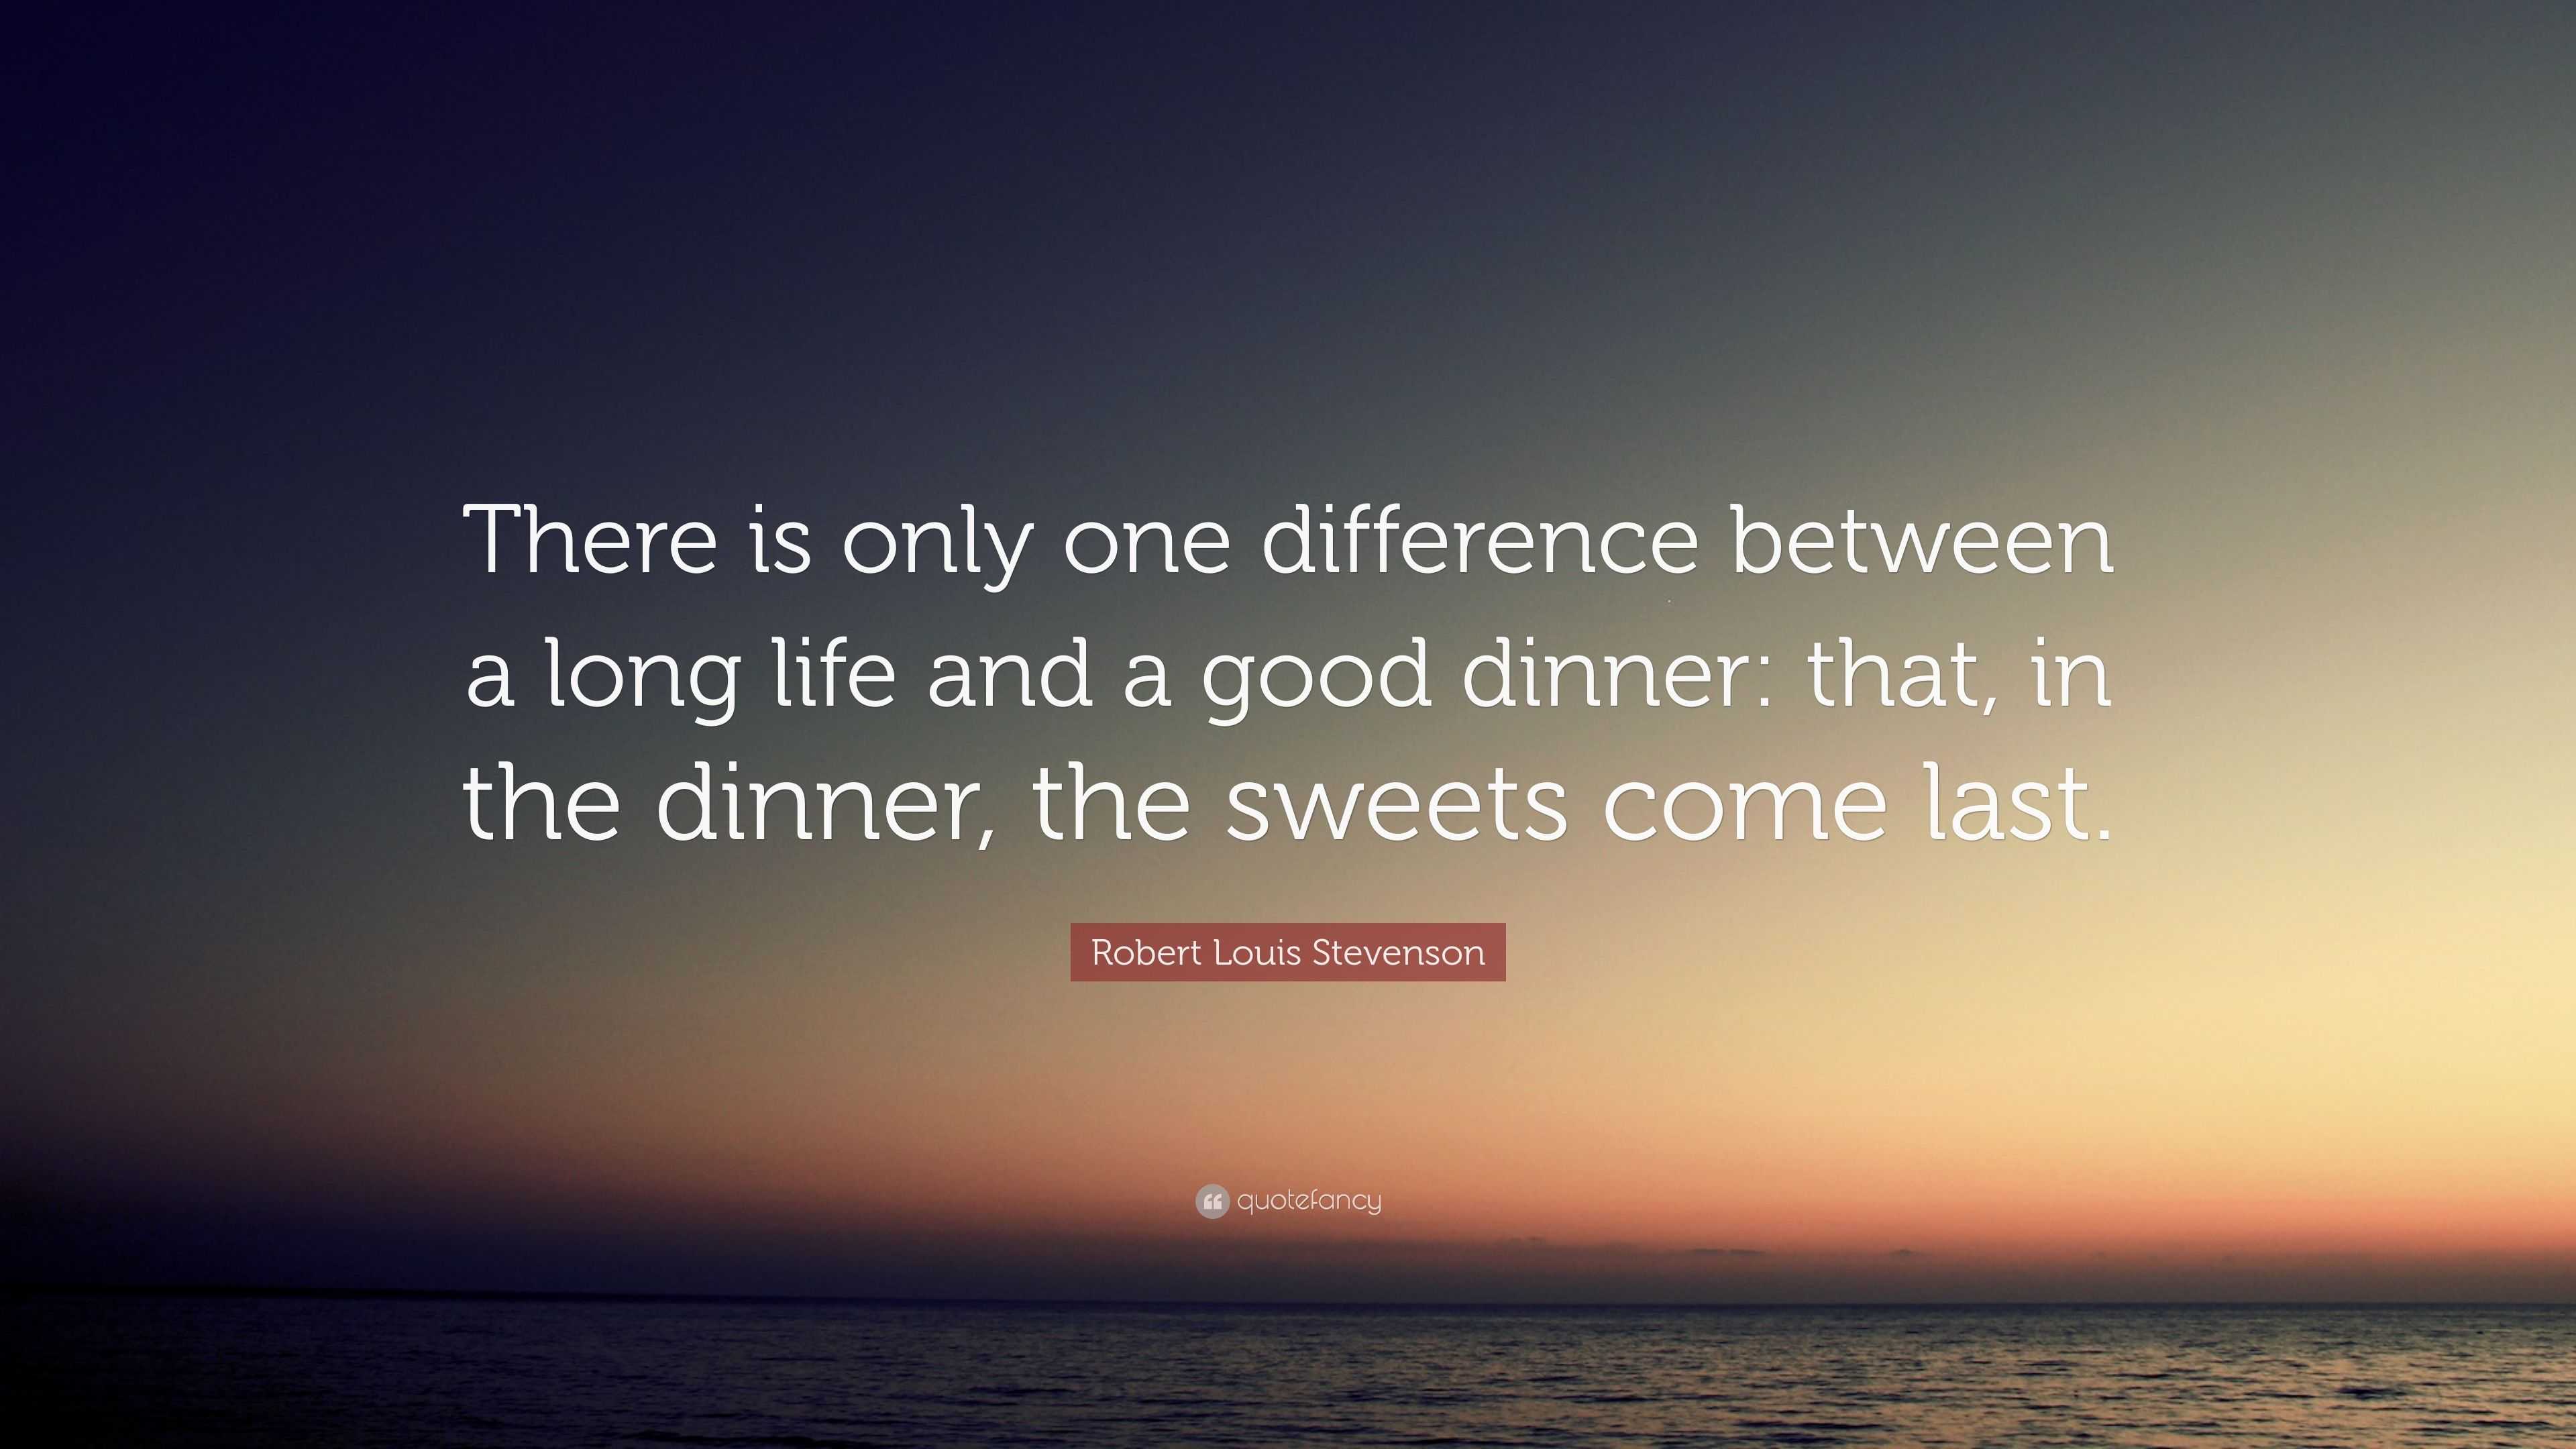 Robert Louis Stevenson Quote: “There is only one difference